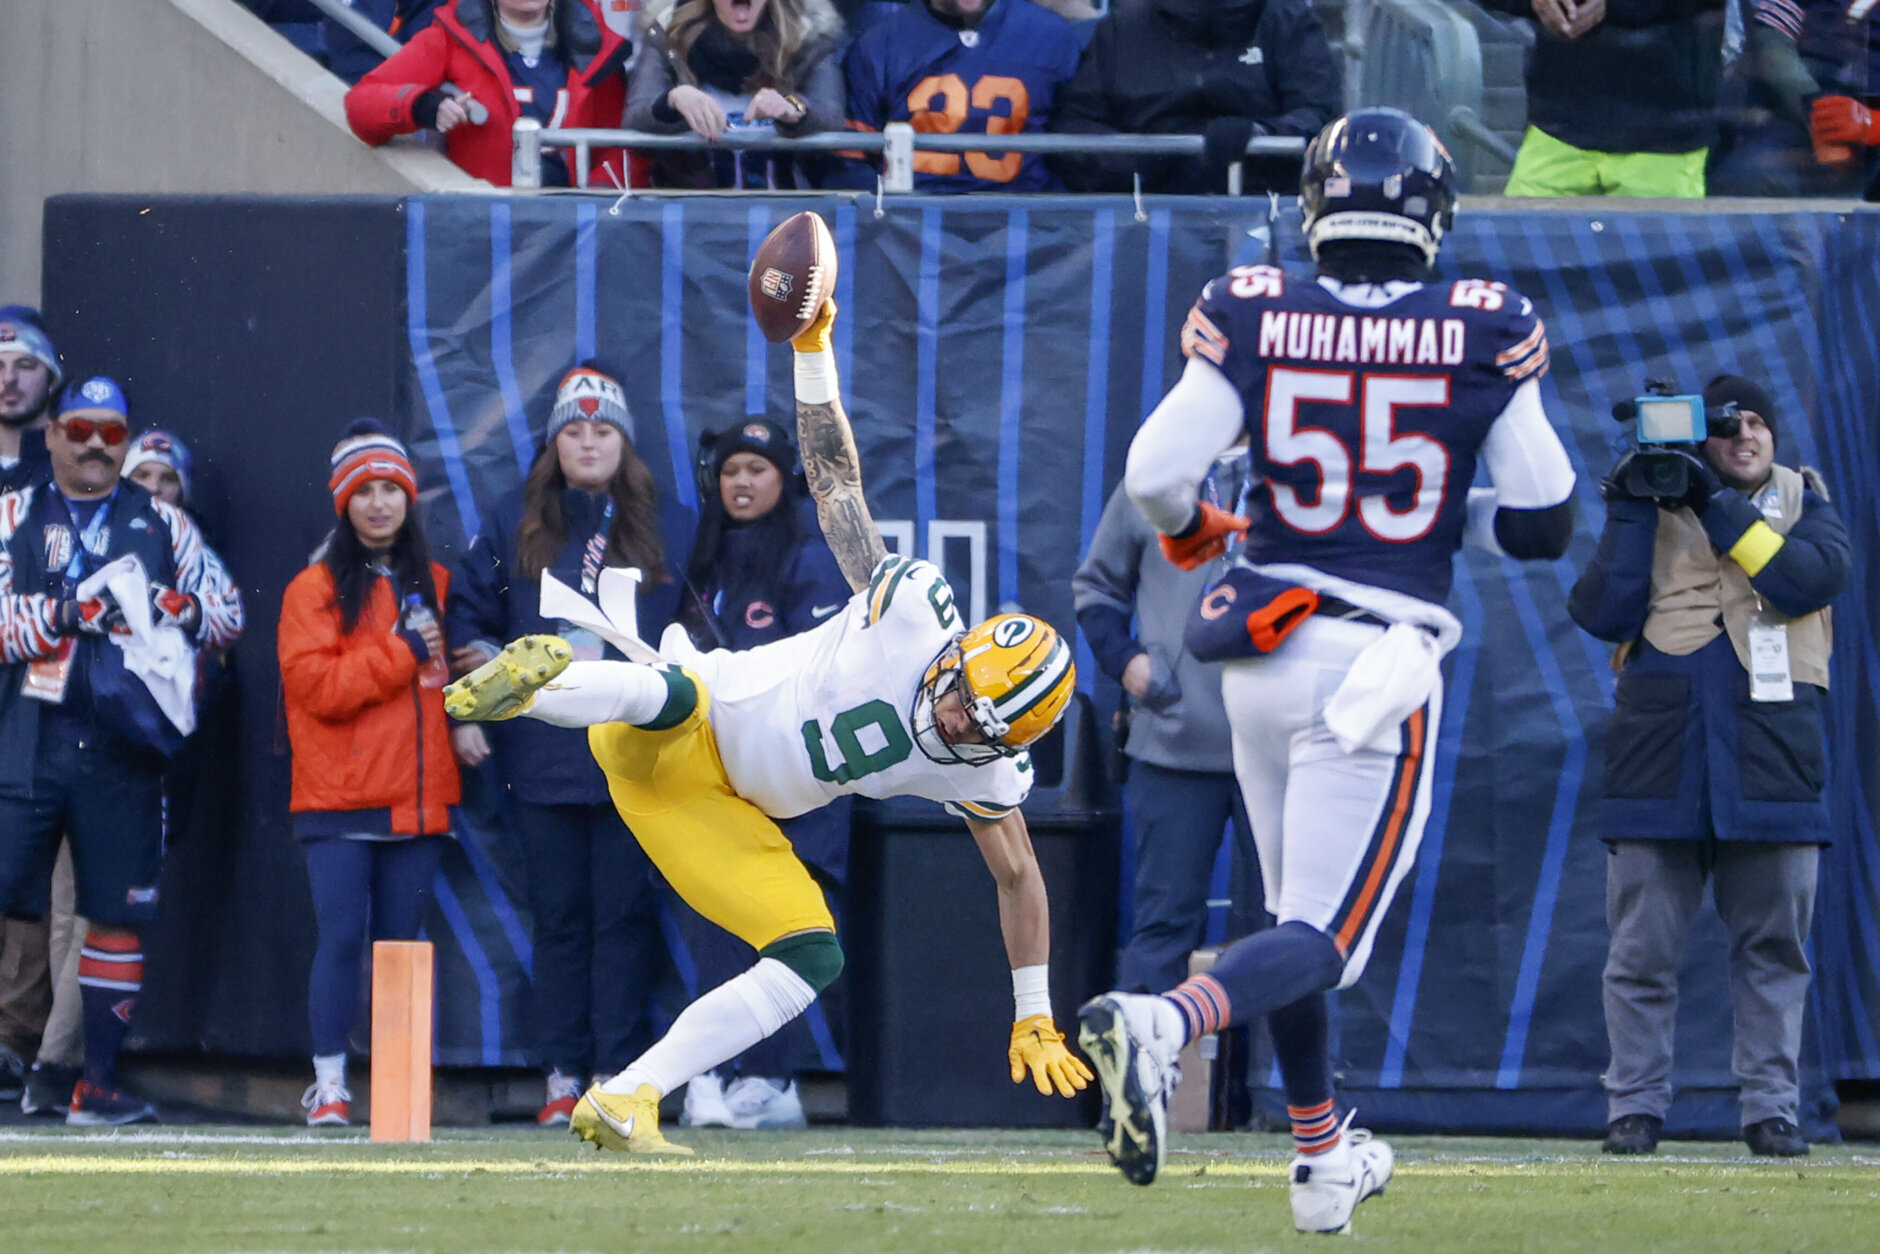 <p><b><i>Packers 28</i></b><br />
<b><i>Bears 19</i></b></p>
<p>Even as Green Bay struggles with <a href="https://profootballtalk.nbcsports.com/2022/11/29/the-packers-now-have-a-different-kind-of-aaron-rodgers-problem/" target="_blank" rel="noopener">their Aaron Rodgers problems</a> (and there&#8217;s definitely <a href="https://profootballtalk.nbcsports.com/2022/11/29/deshone-kizer-aaron-rodgers-asked-me-if-i-believe-in-9-11/" target="_blank" rel="noopener">more than one</a>), the Packers surpassed their hated rival for the most franchise wins in NFL history, <a href="https://twitter.com/ESPNStatsInfo/status/1599511219504701440?s=20&amp;t=JDeaKN4d1GXs2lGtUHWXpA" target="_blank" rel="noopener">pushing Chicago out of that perch for the first time in more than a century</a>. Bears fans&#8217; only hope to take the baton back is a Justin Fields reign that rivals Rodgers&#8217; in Titletown. Good luck, Chicago.</p>
